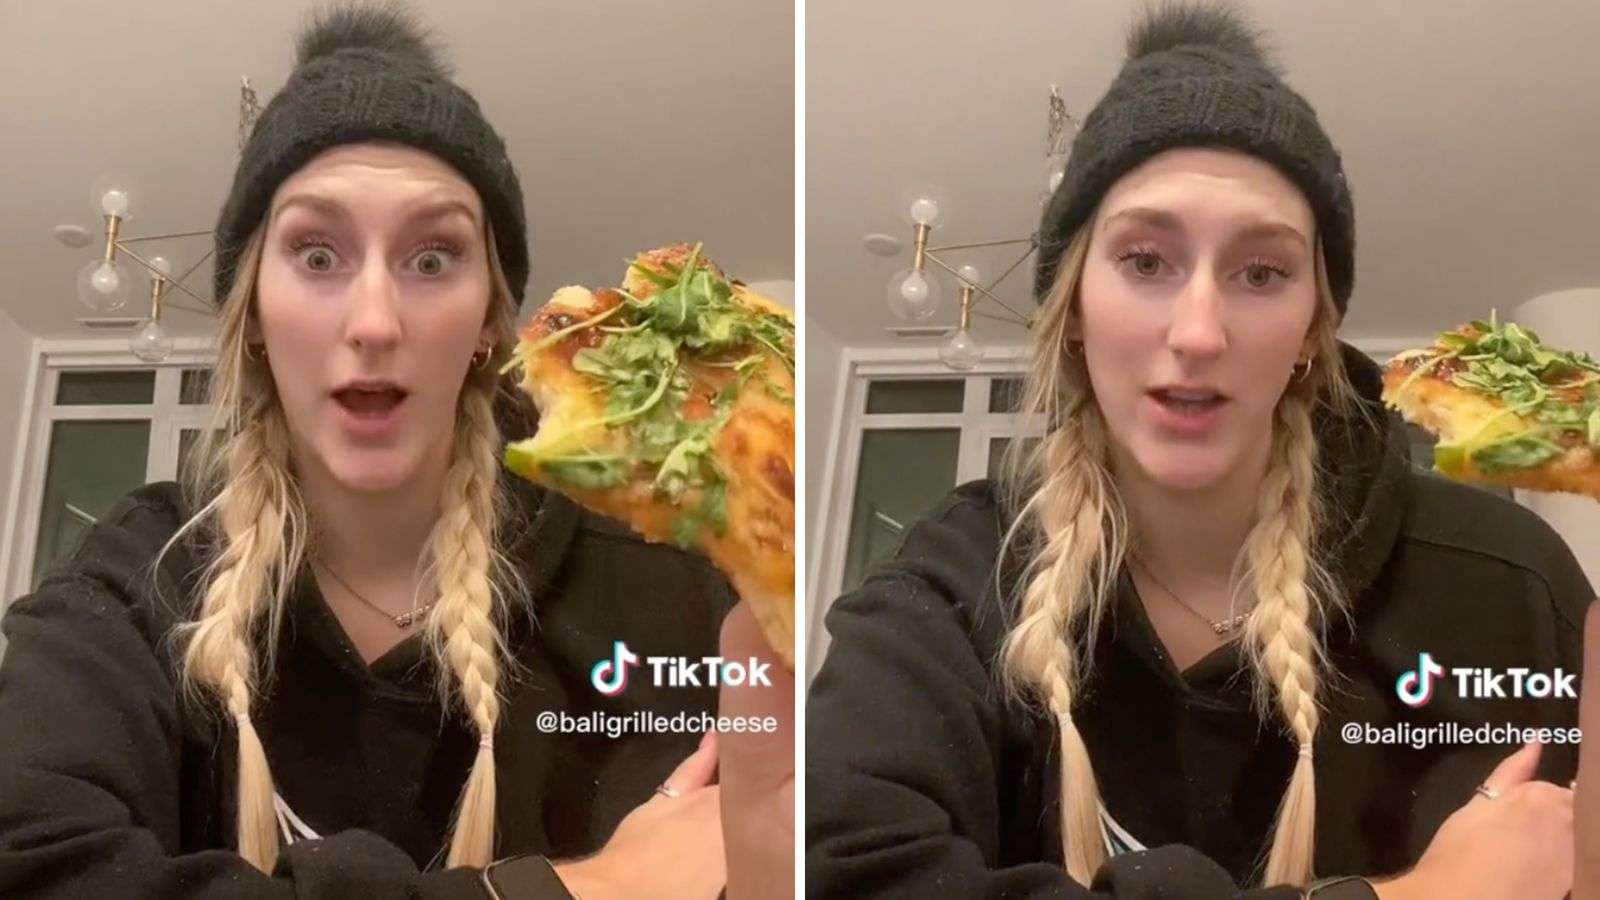 Woman divides internet after claiming all vegetarians have cheat meals in viral video